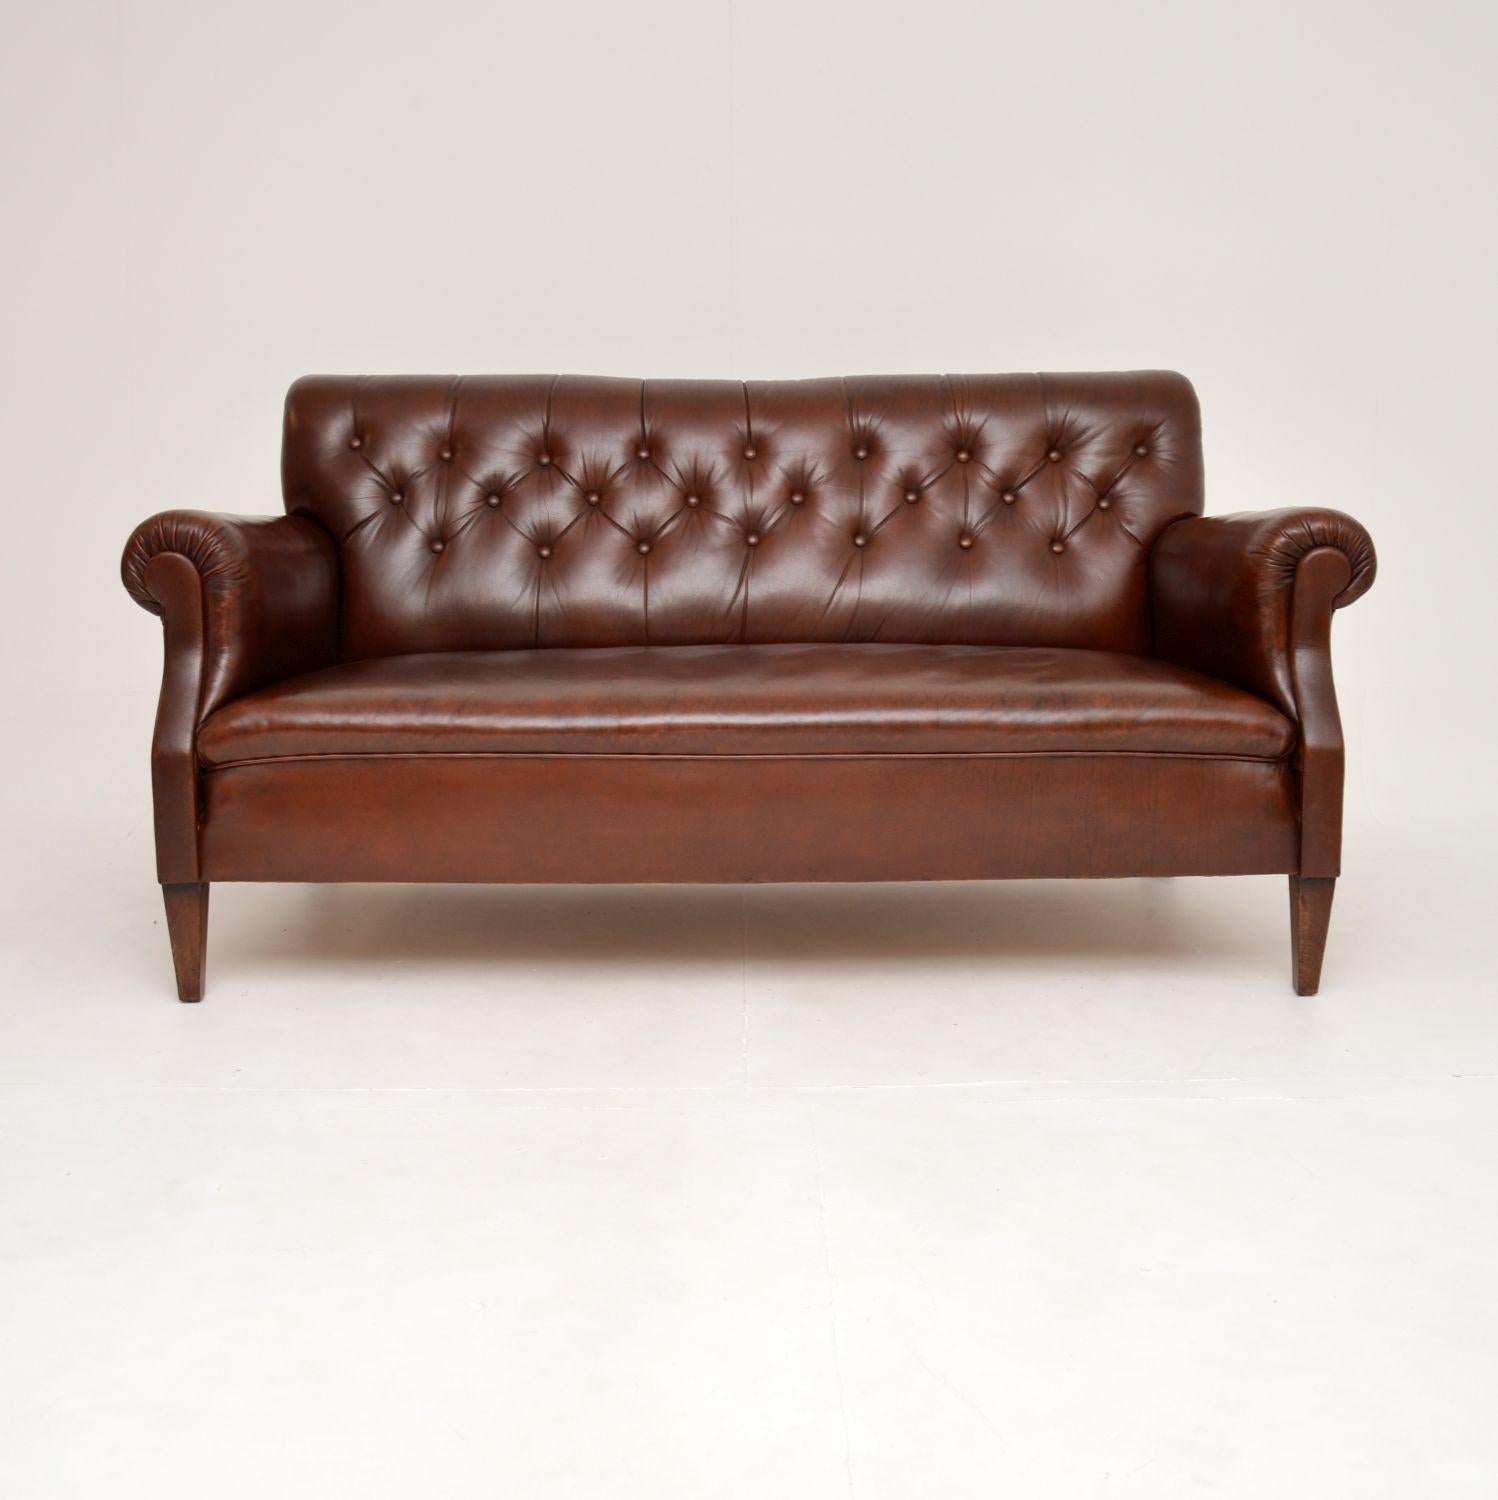 An outstanding antique Swedish leather sofa, recently imported from Sweden and dating from the 1900-1920 period.

This is of amazing quality, it is well sprung, generous and very comfortable to relax in. The brown leather has a gorgeous colour tone,